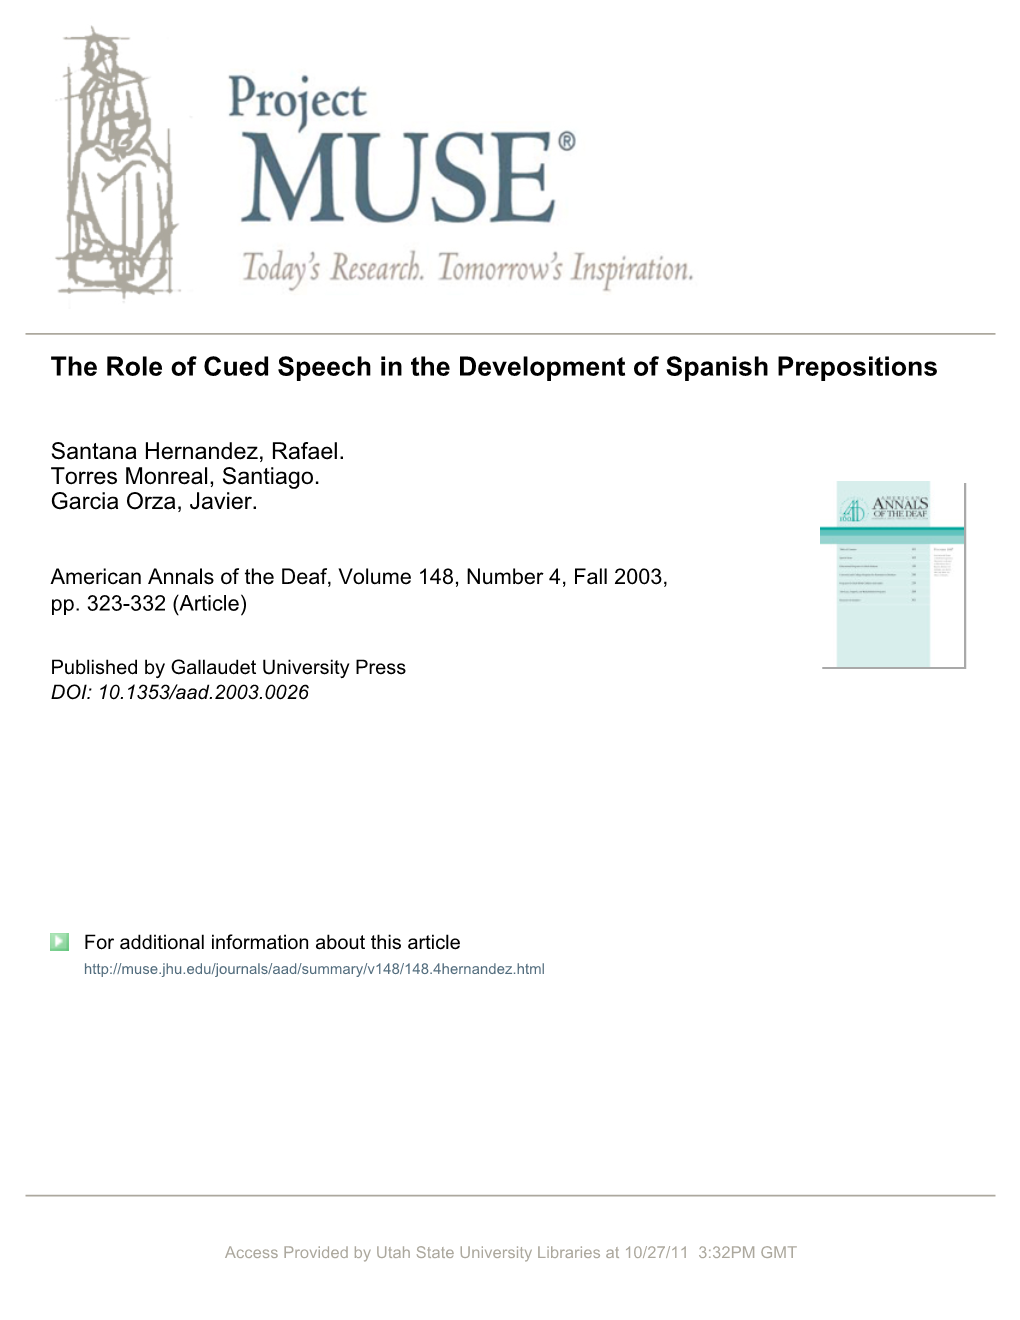 The Role of Cued Speech in the Development of Spanish Prepositions